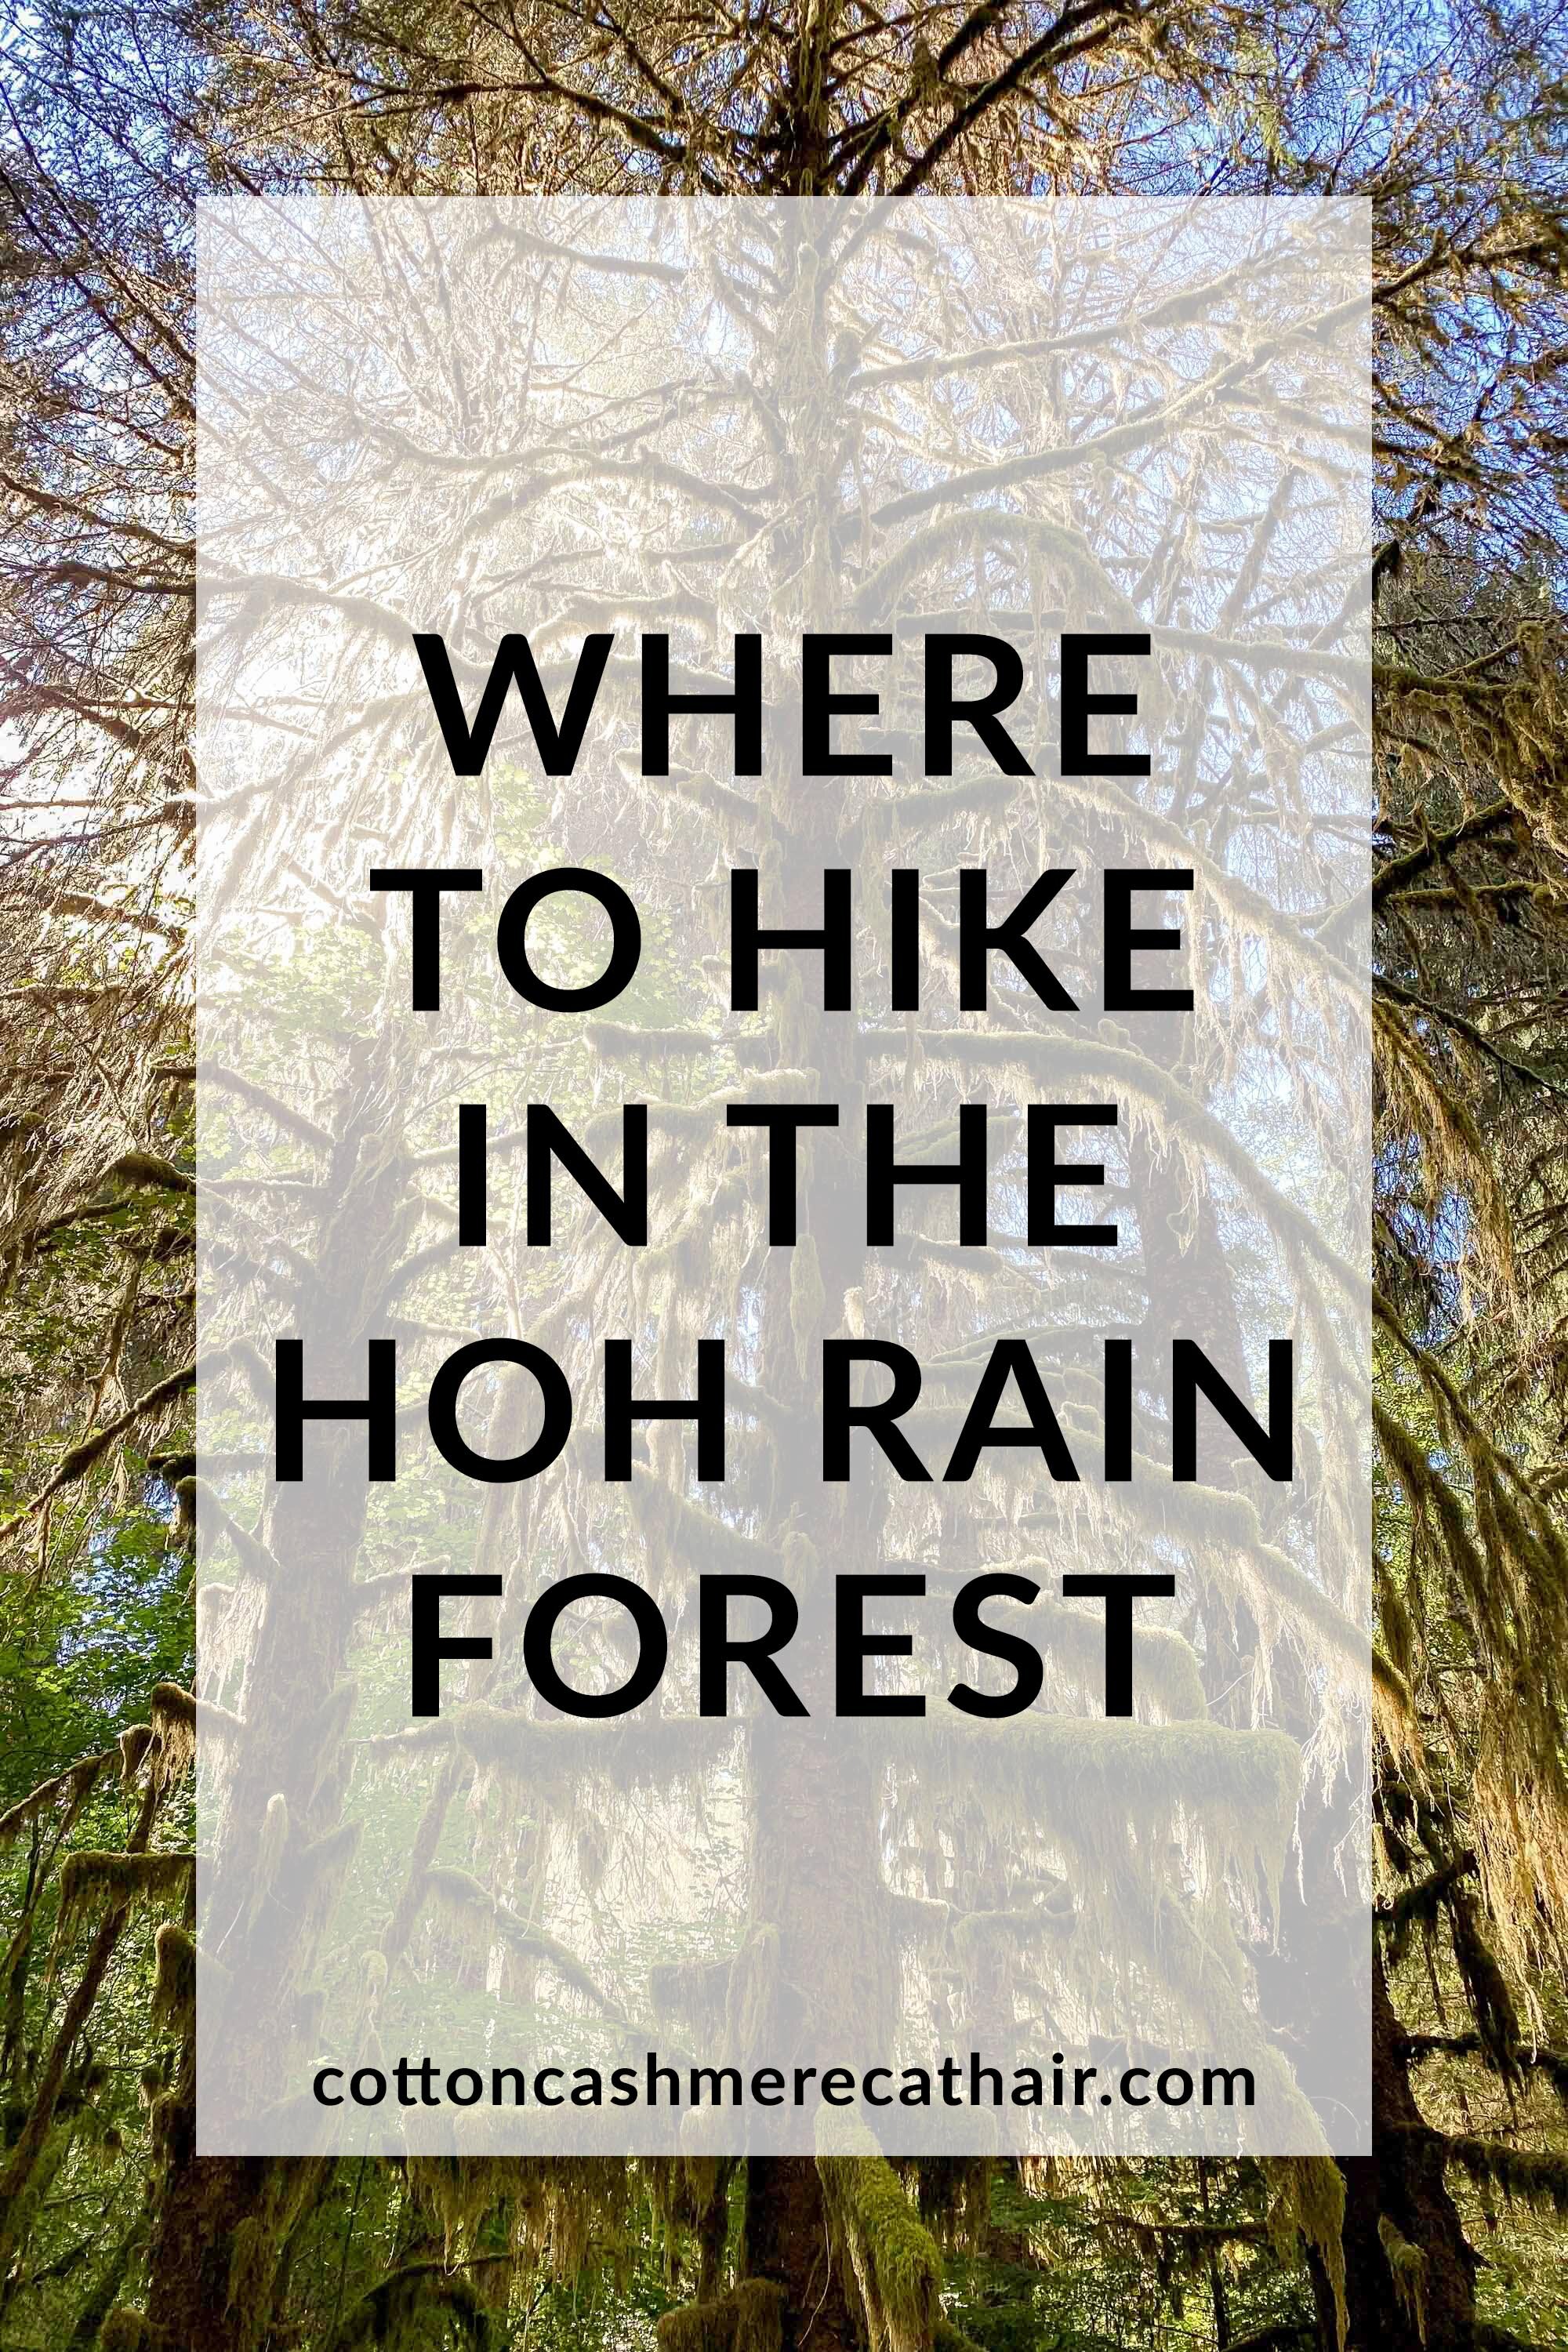 Where to hike in the Hoh Rain Forest